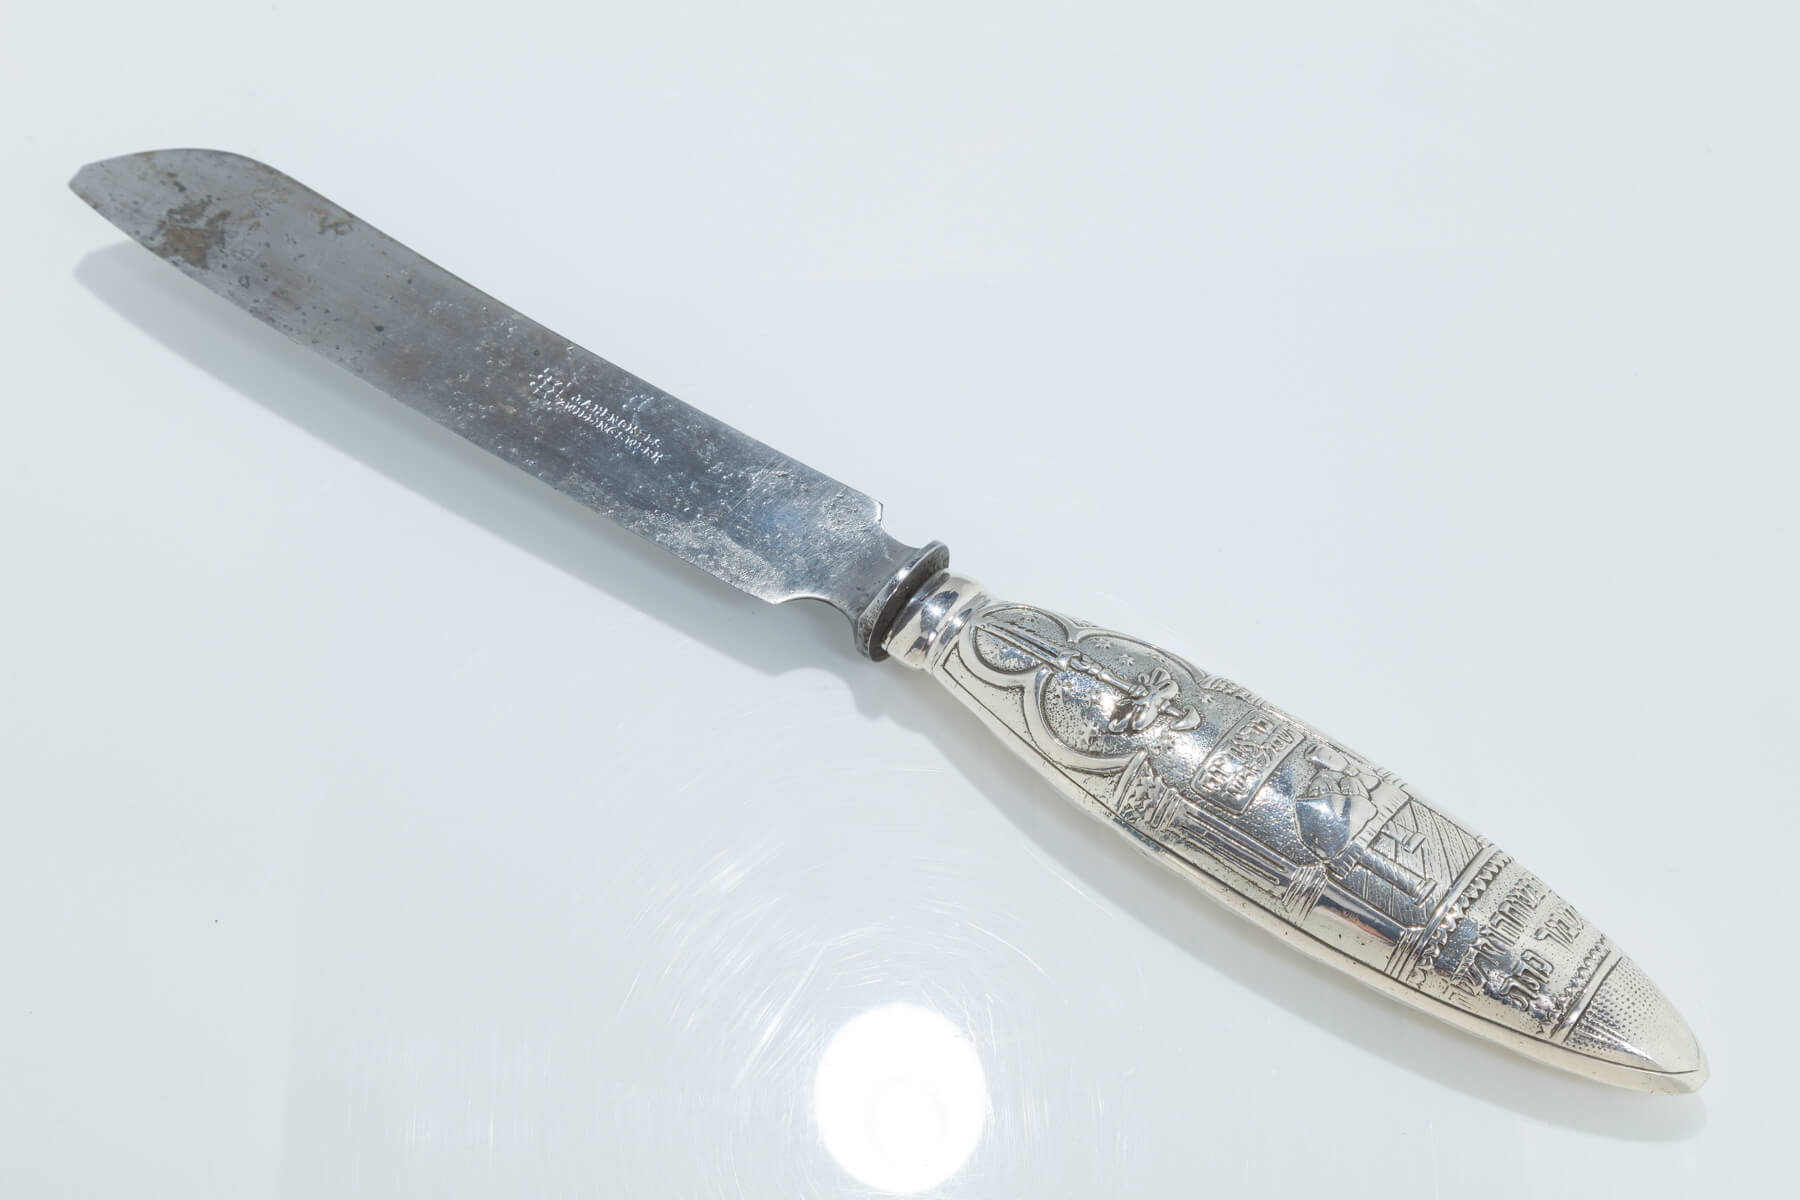 004. A Challah Knife With Silver Handle